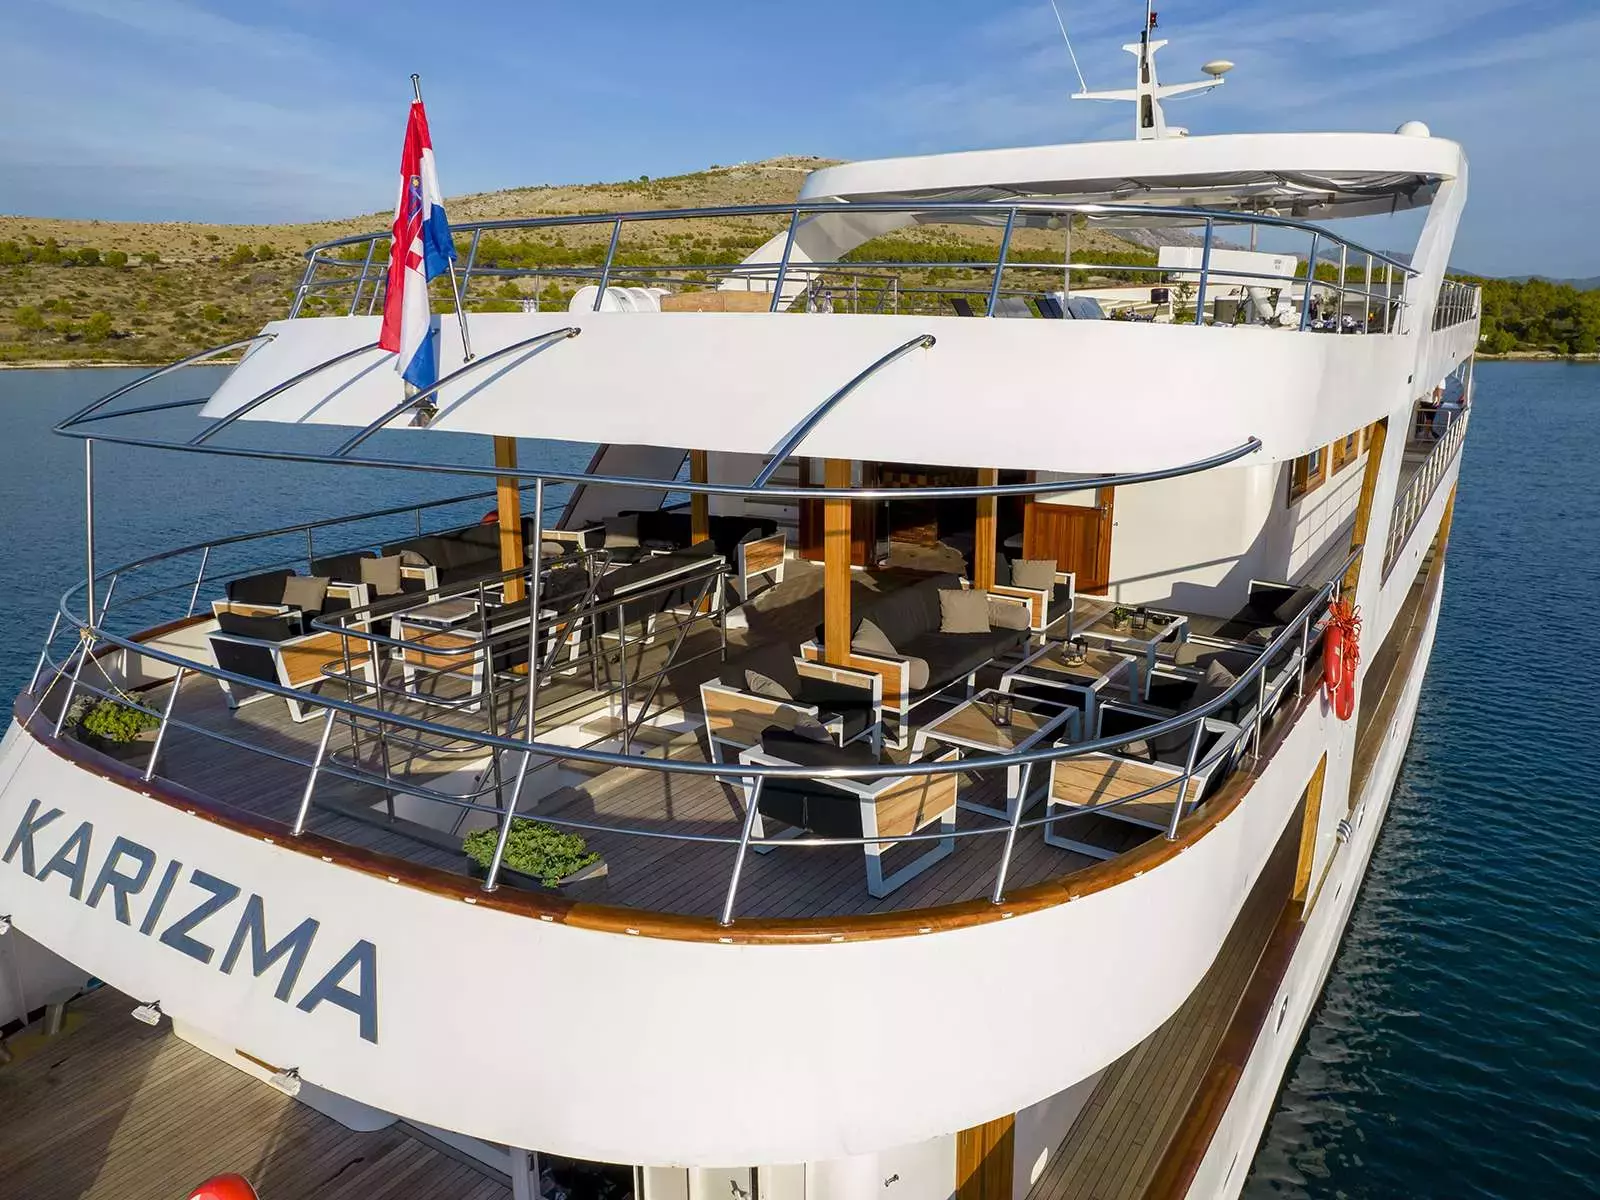 Karizma by Custom Made - Top rates for a Charter of a private Motor Yacht in Croatia